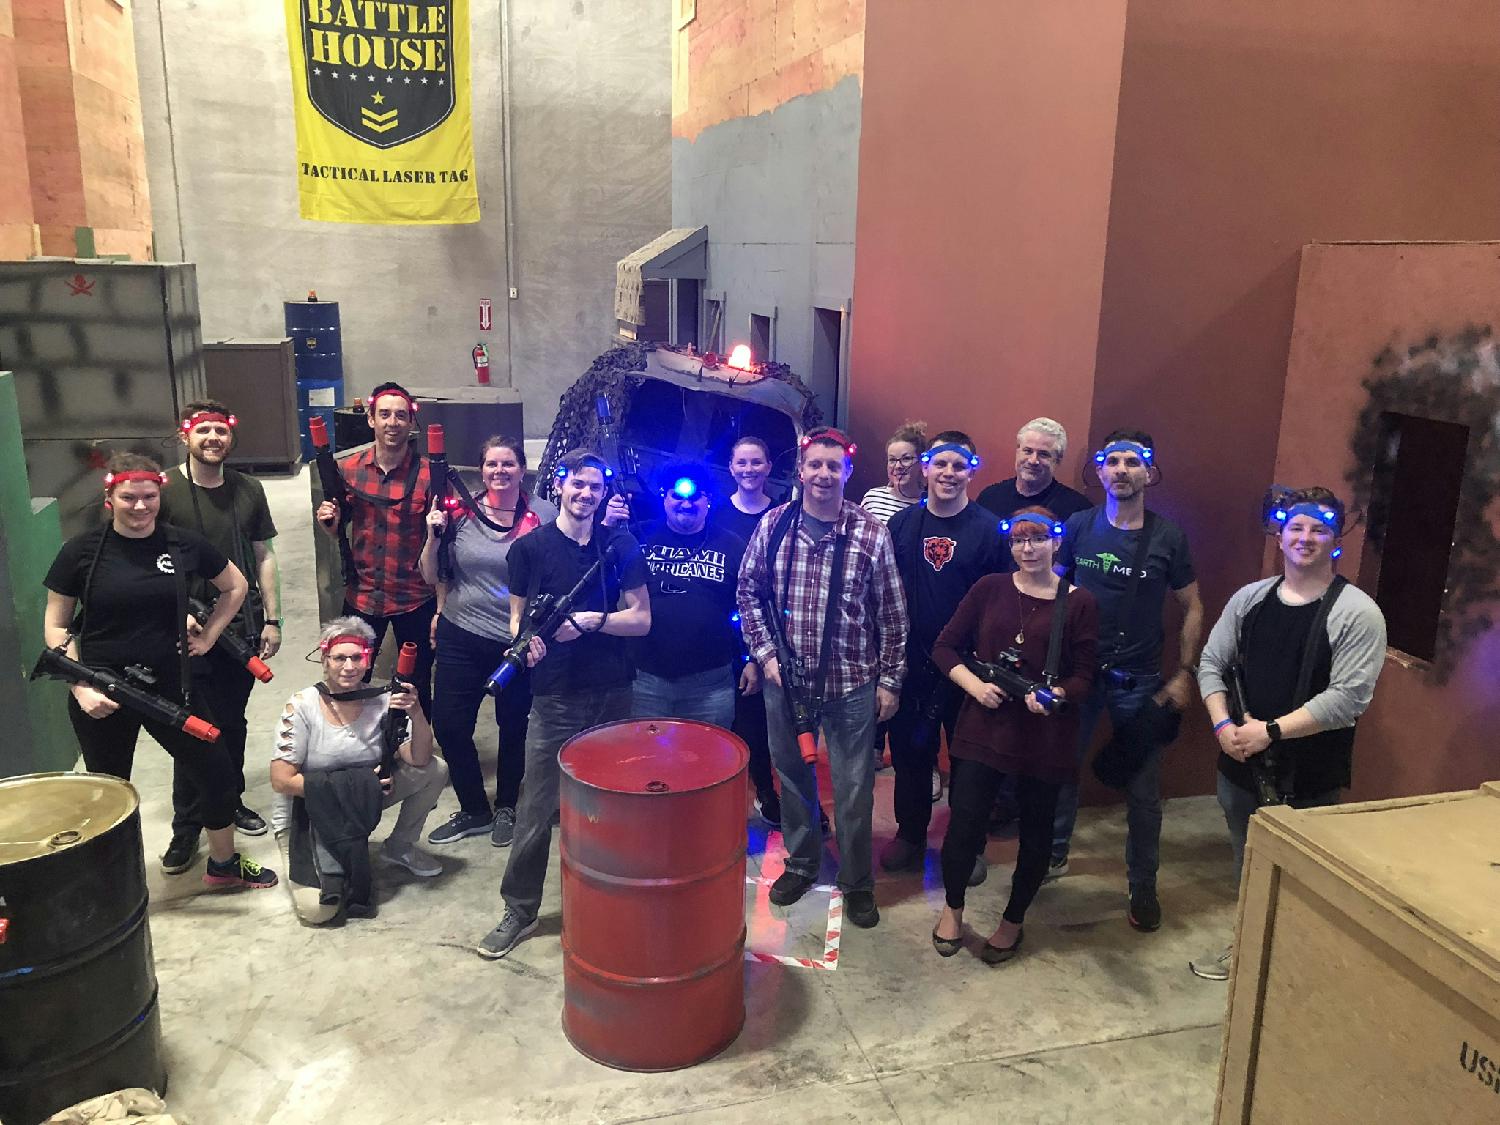 JumpFly at Battle House Laser Tag for team building event